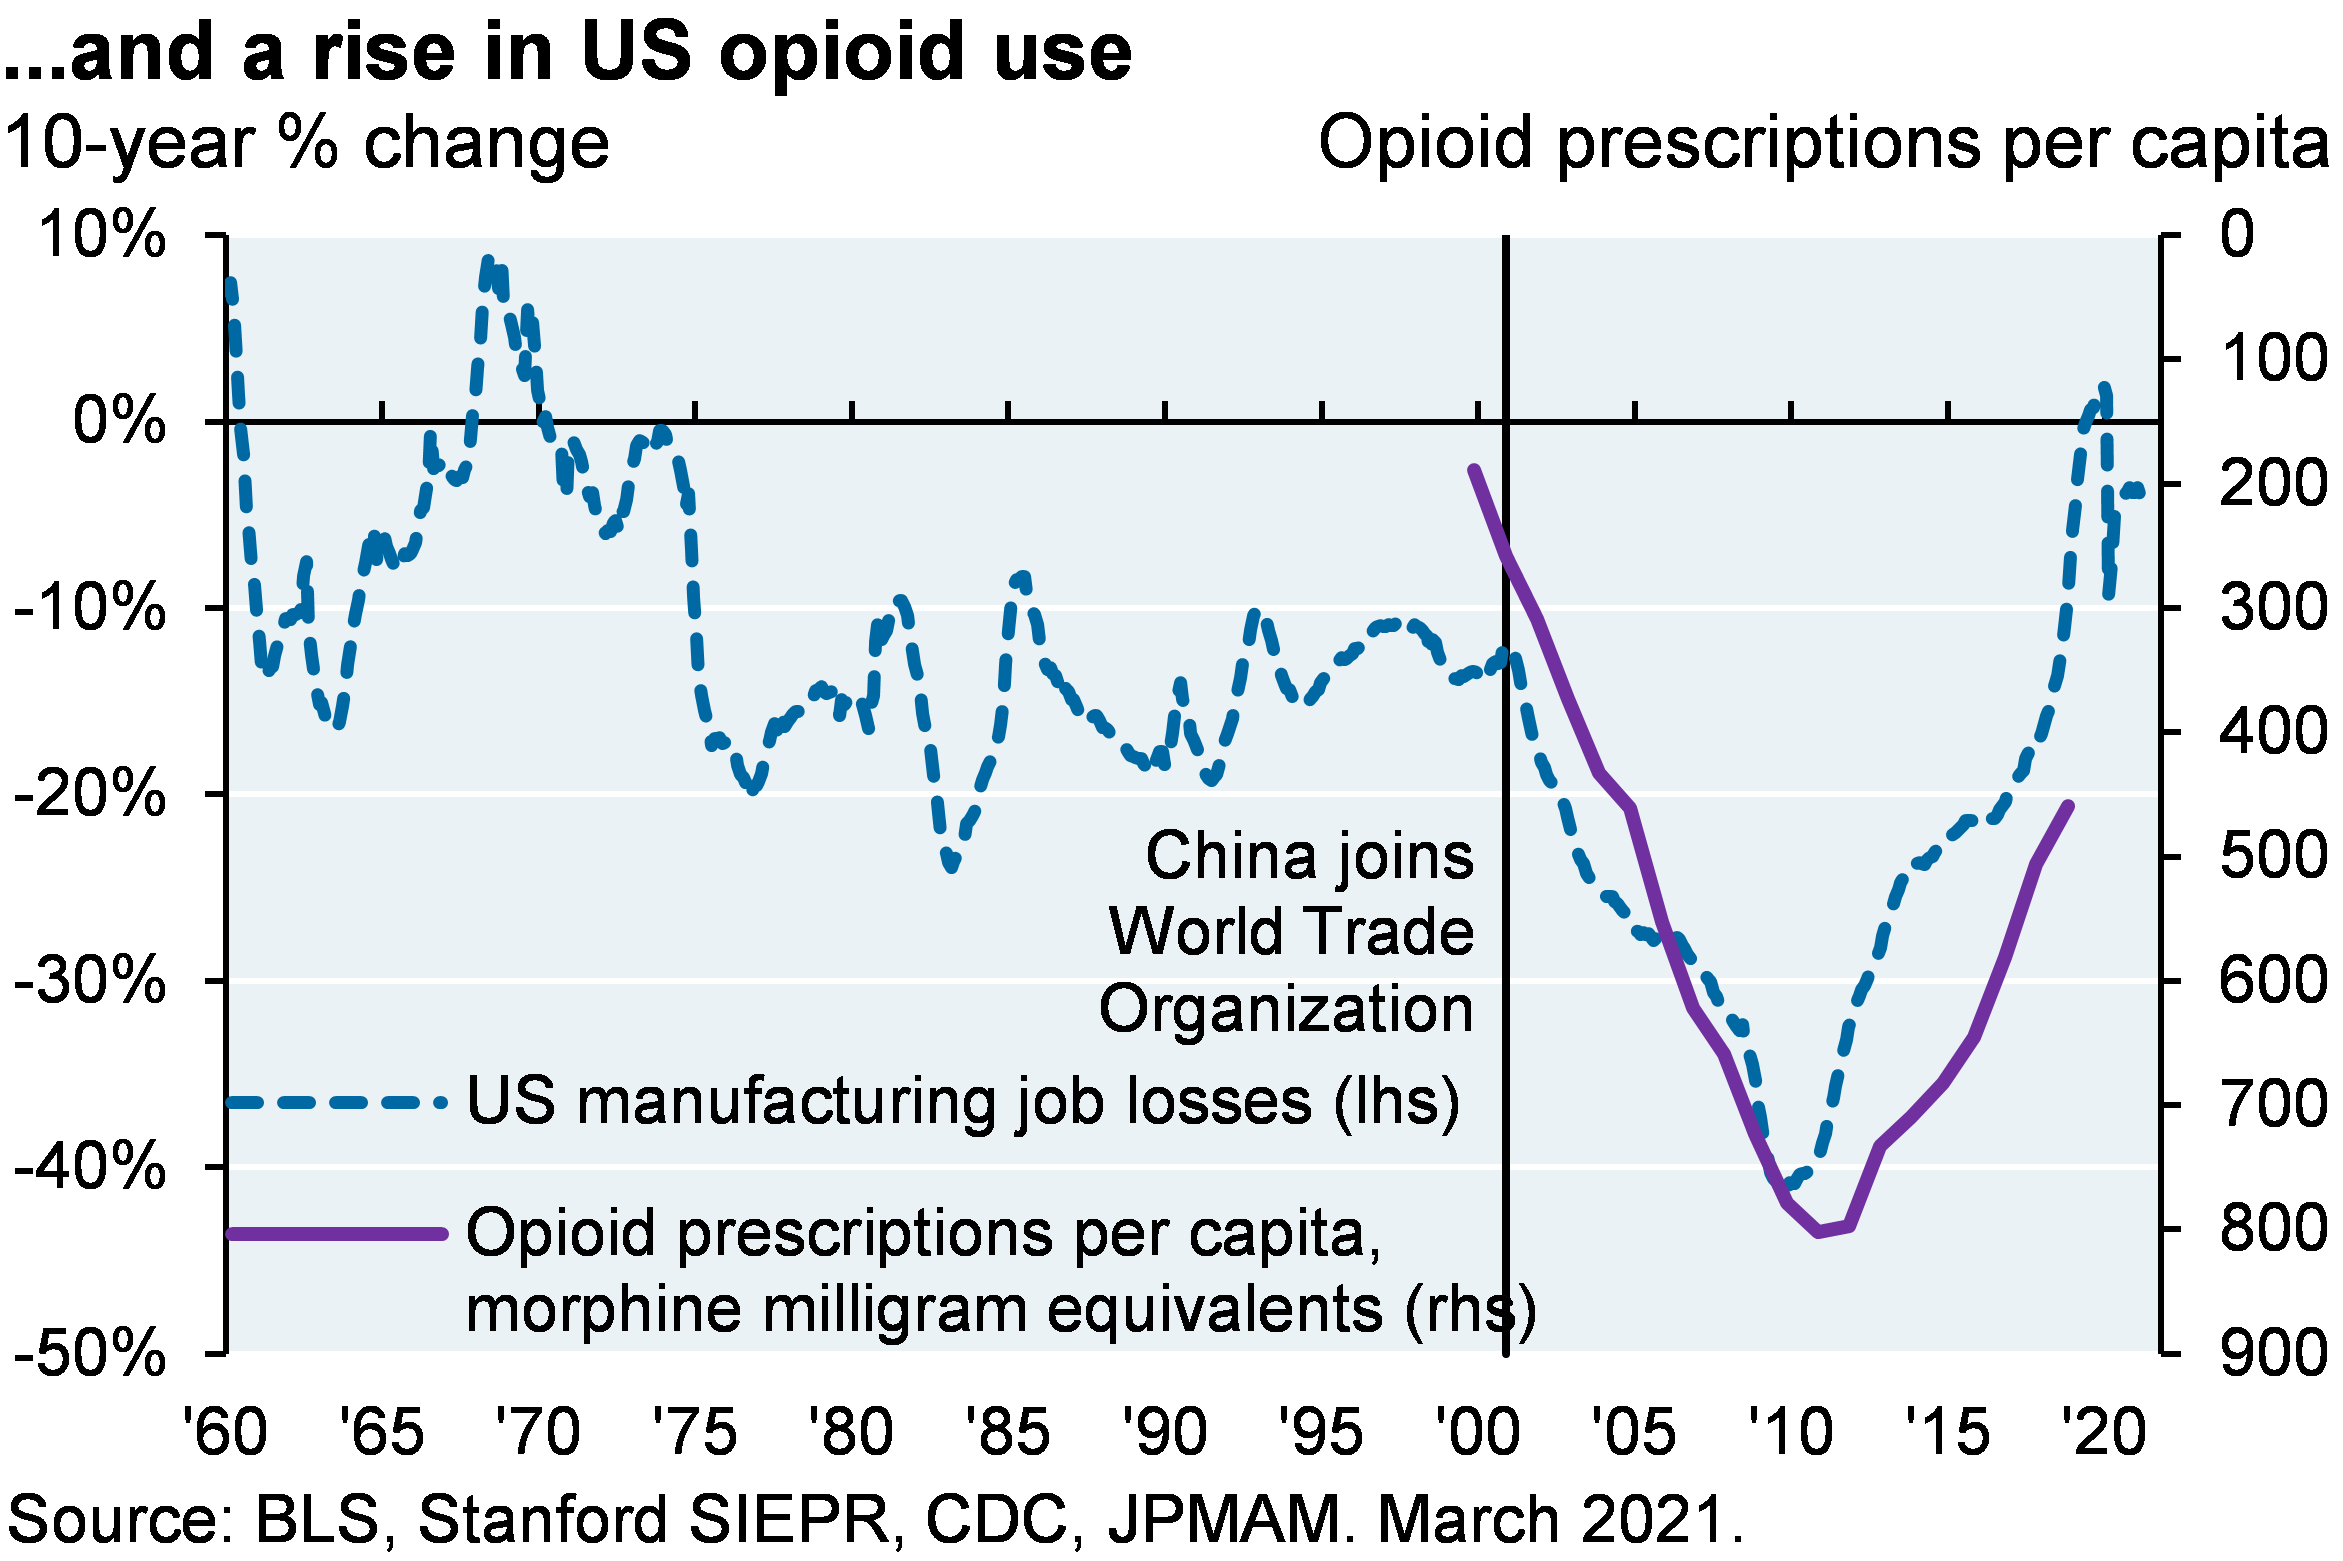 Line chart shows the 10-year % change in US manufacturing jobs since 1960 vs opioid prescriptions per capita. Chart shows that after China joined the WTO in 2000, opioid prescriptions increased at the same time that its manufacturing jobs decreased. However, since around 2010, manufacturing jobs have increased and opioid prescriptions have decreased